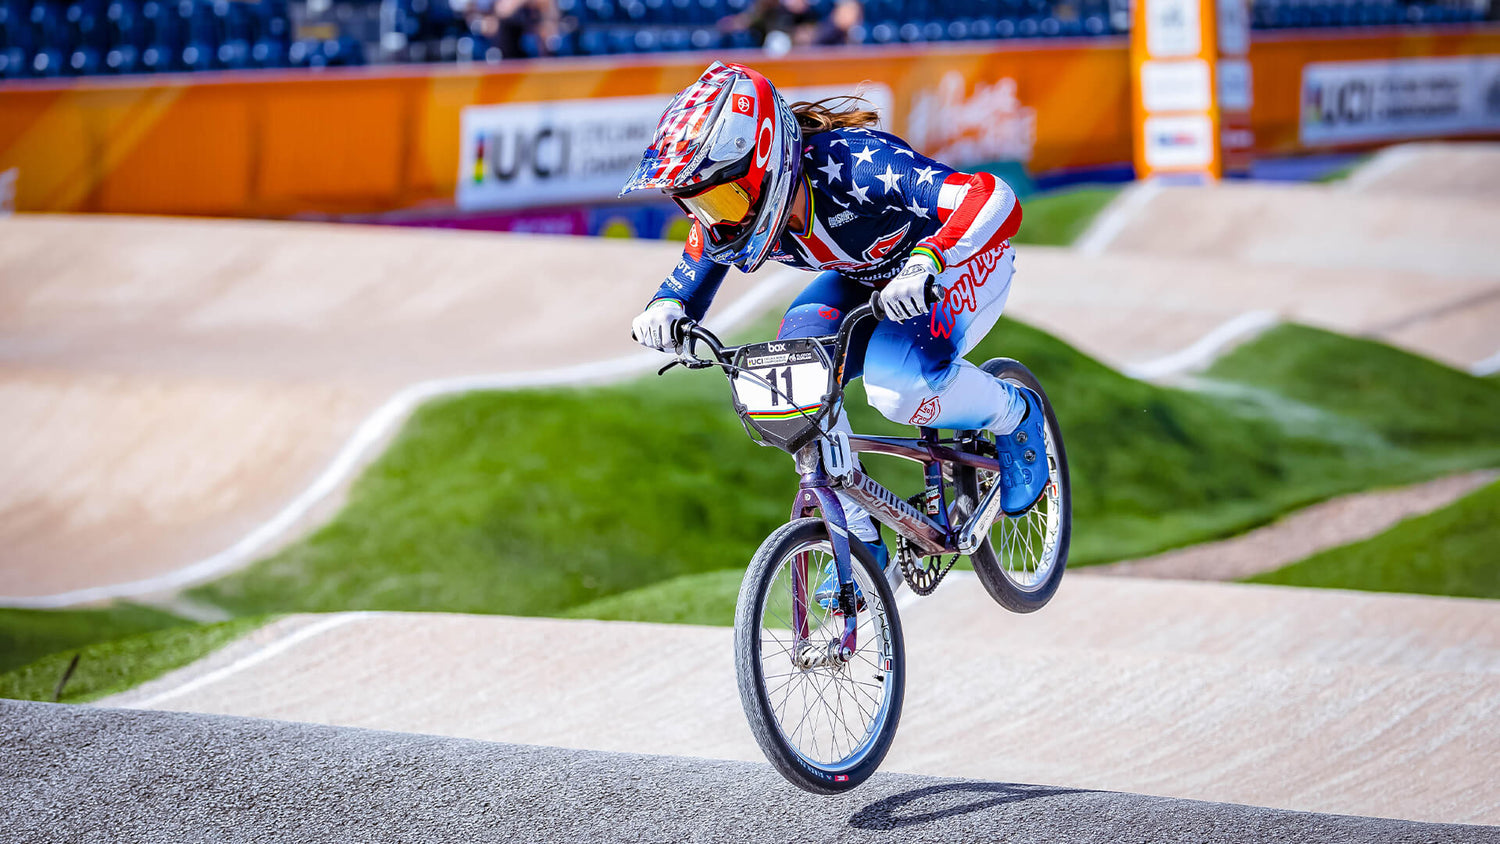 BMX rider going over a jump at the track